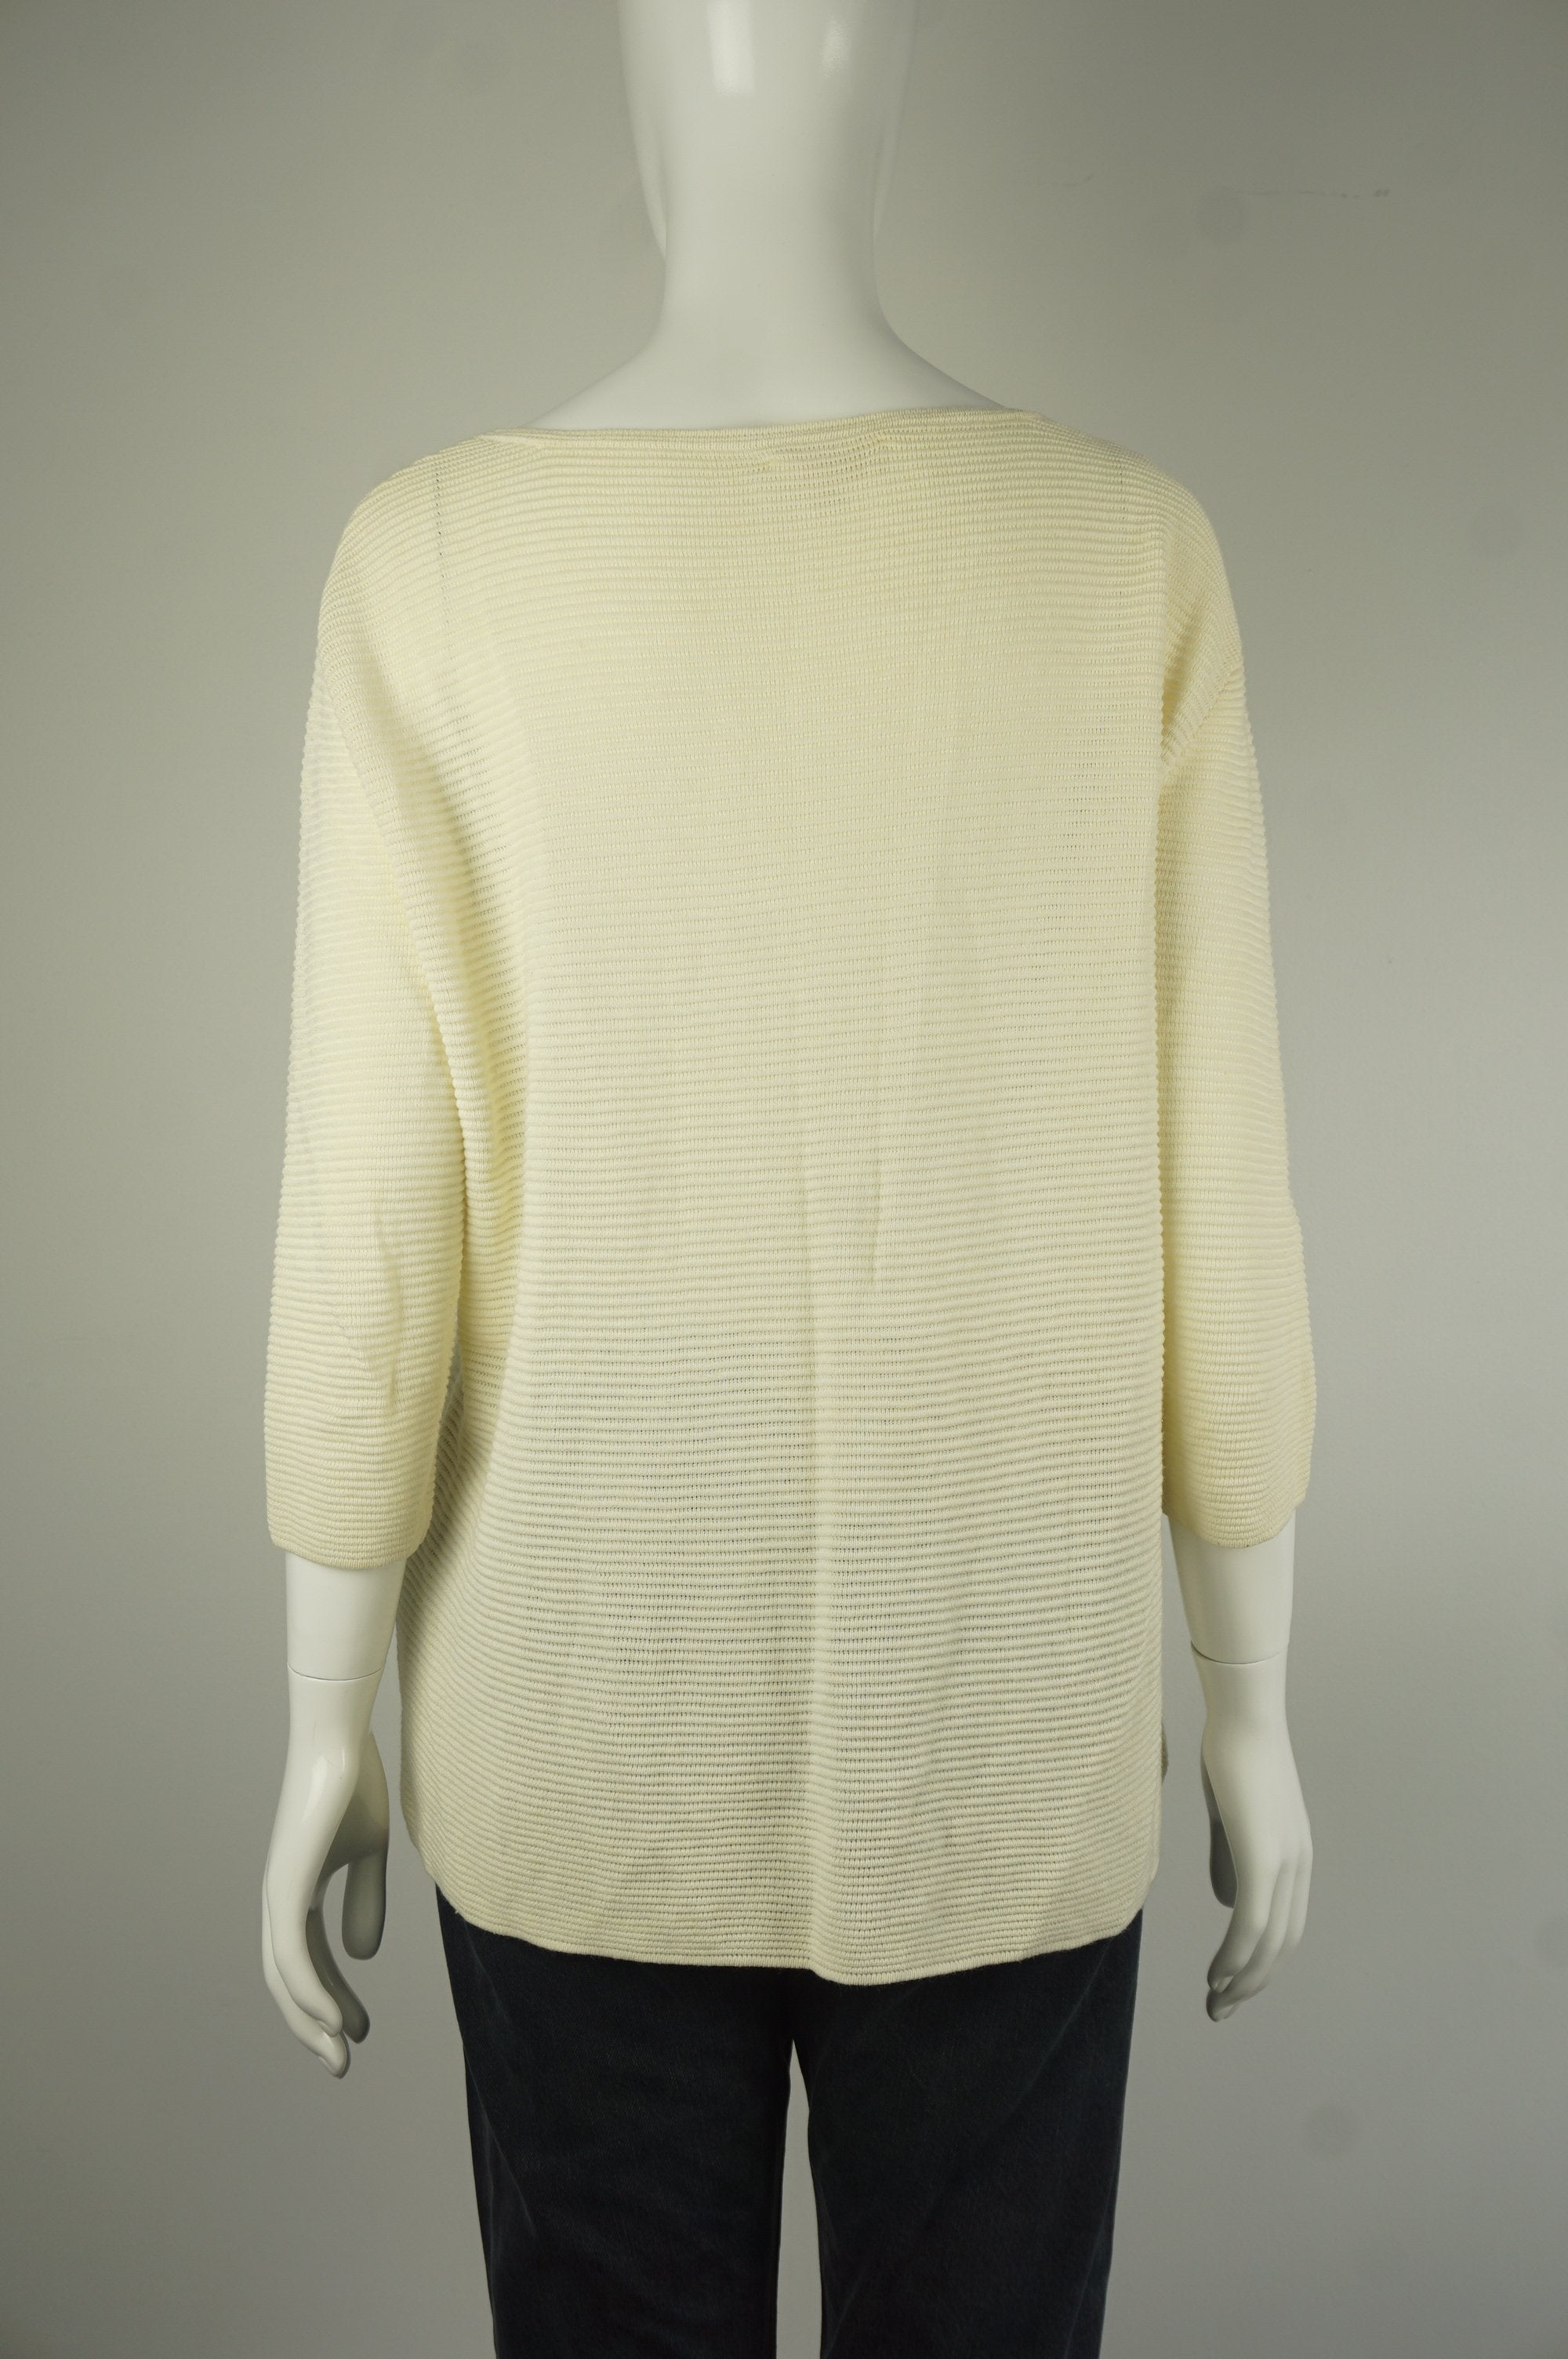 Wilfred Pullover Beige Sweater, Relazed fitting with dropped shoulders. Drapey fabric., Yellow, 68% viscose, 20% linen, 12% nylon, women's Tops, women's Yellow Tops, Wilfred women's Tops, wilfred loose sweater, arizia women's loose sweater, women's sweater, arizia women's pullover sweater